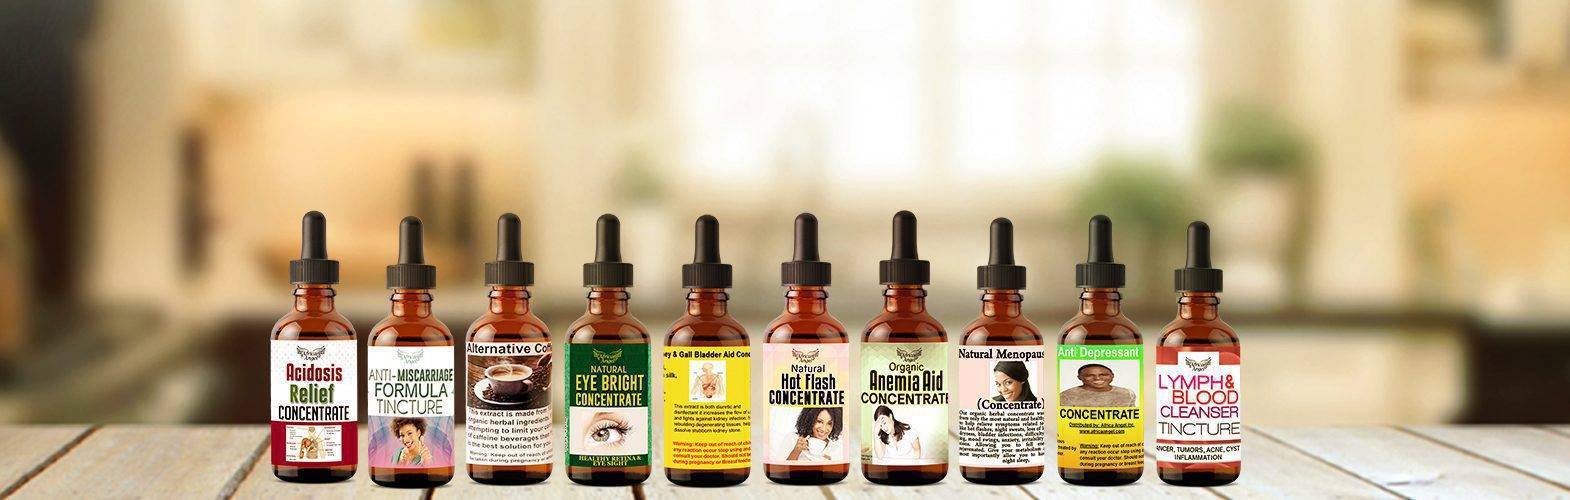 Africa Angel Inc Herbal Concentrates